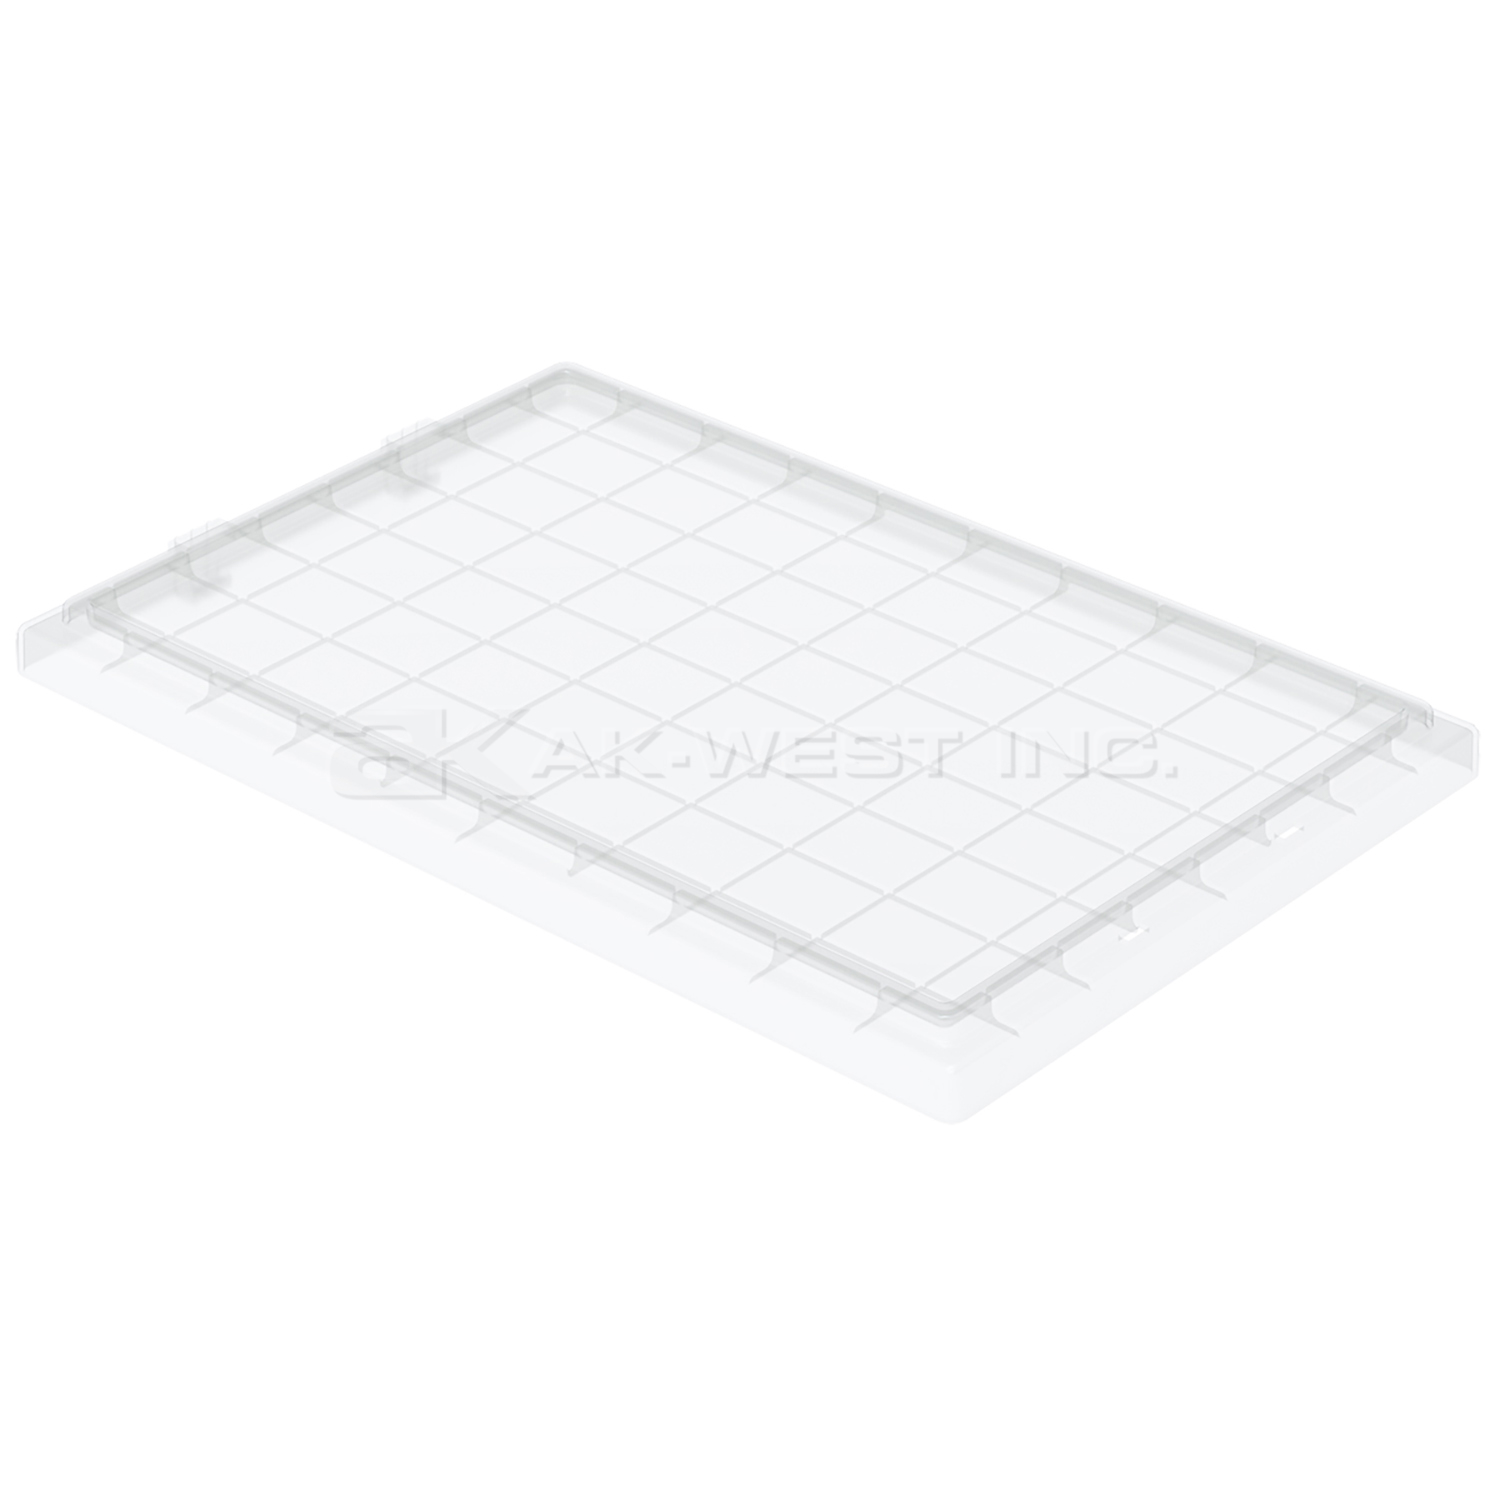 Clear, Lid For 35240 (3 Per Carton)